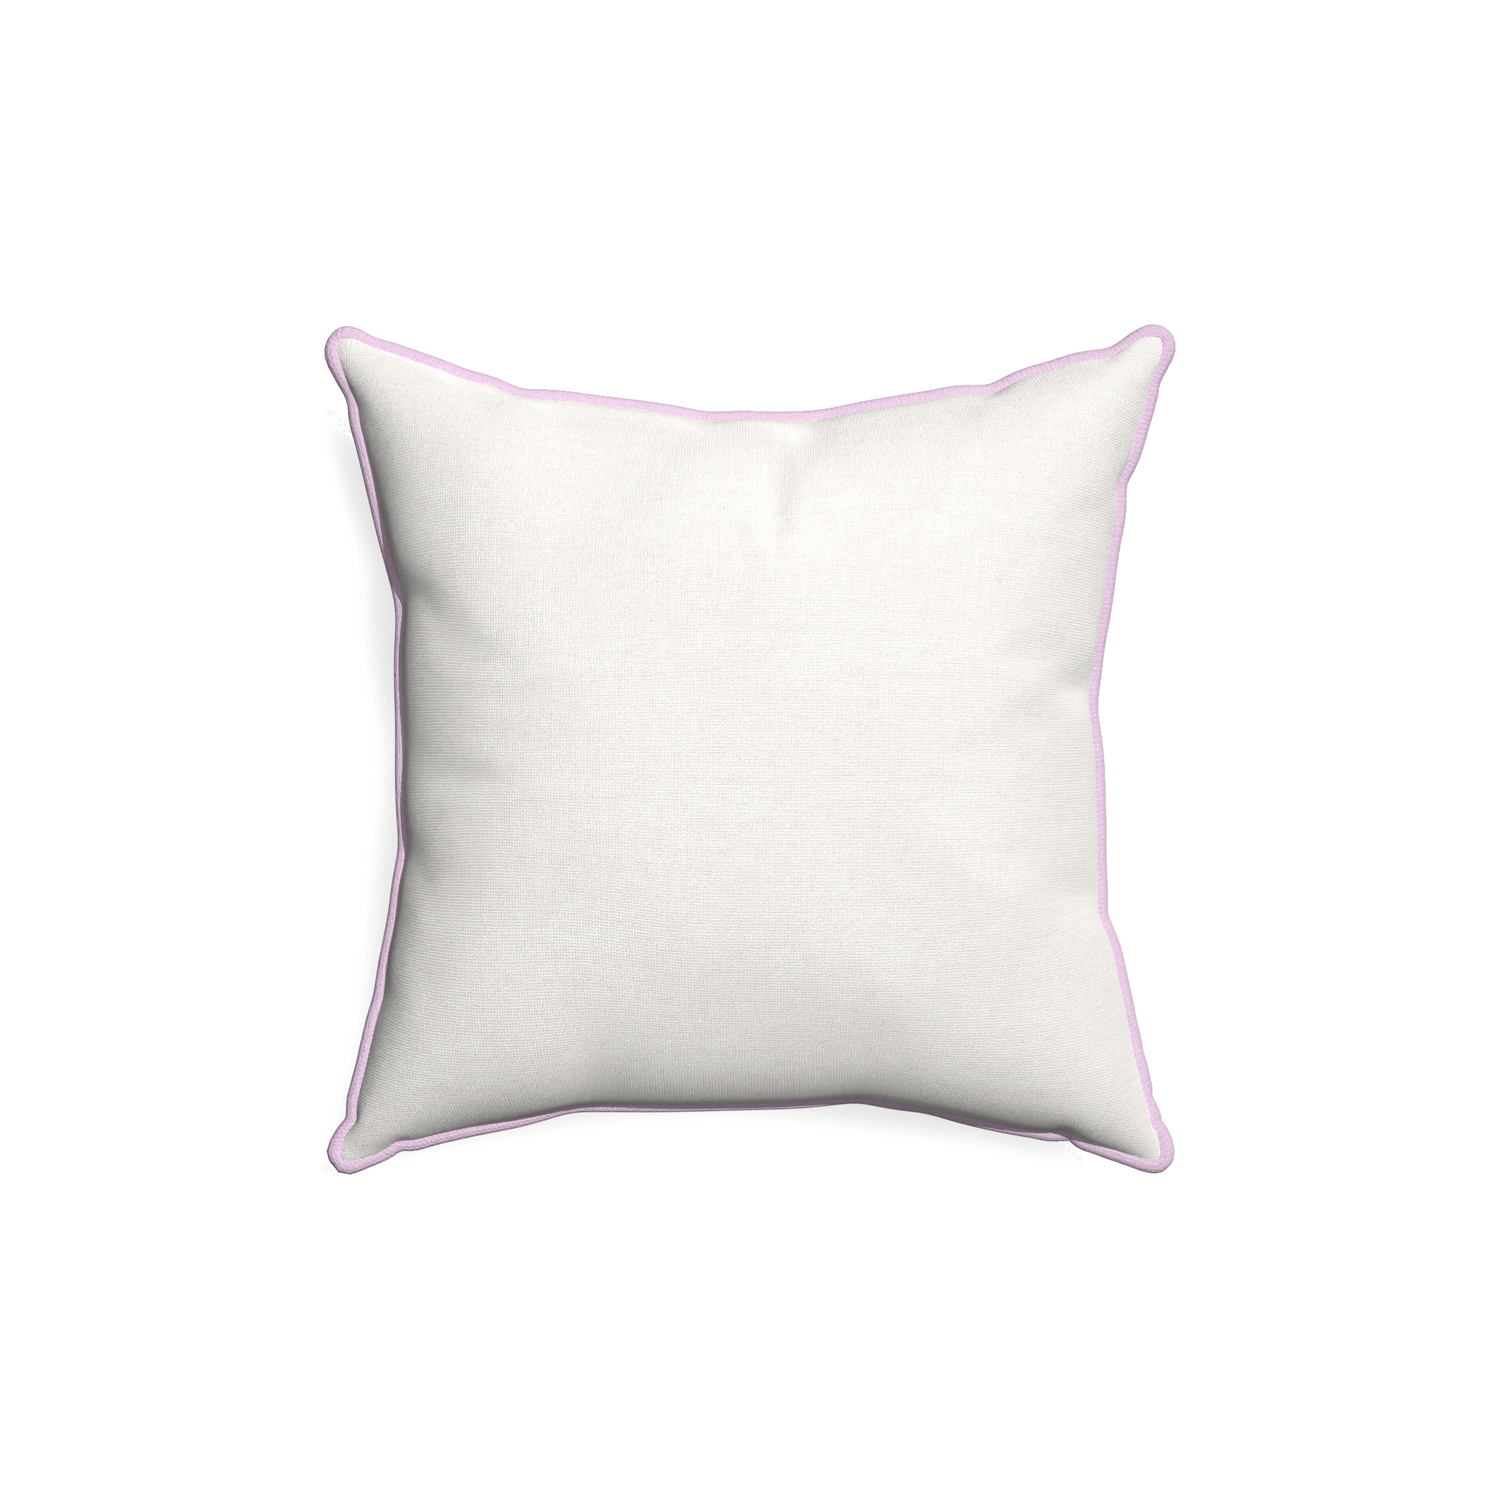 18-square flour custom pillow with l piping on white background